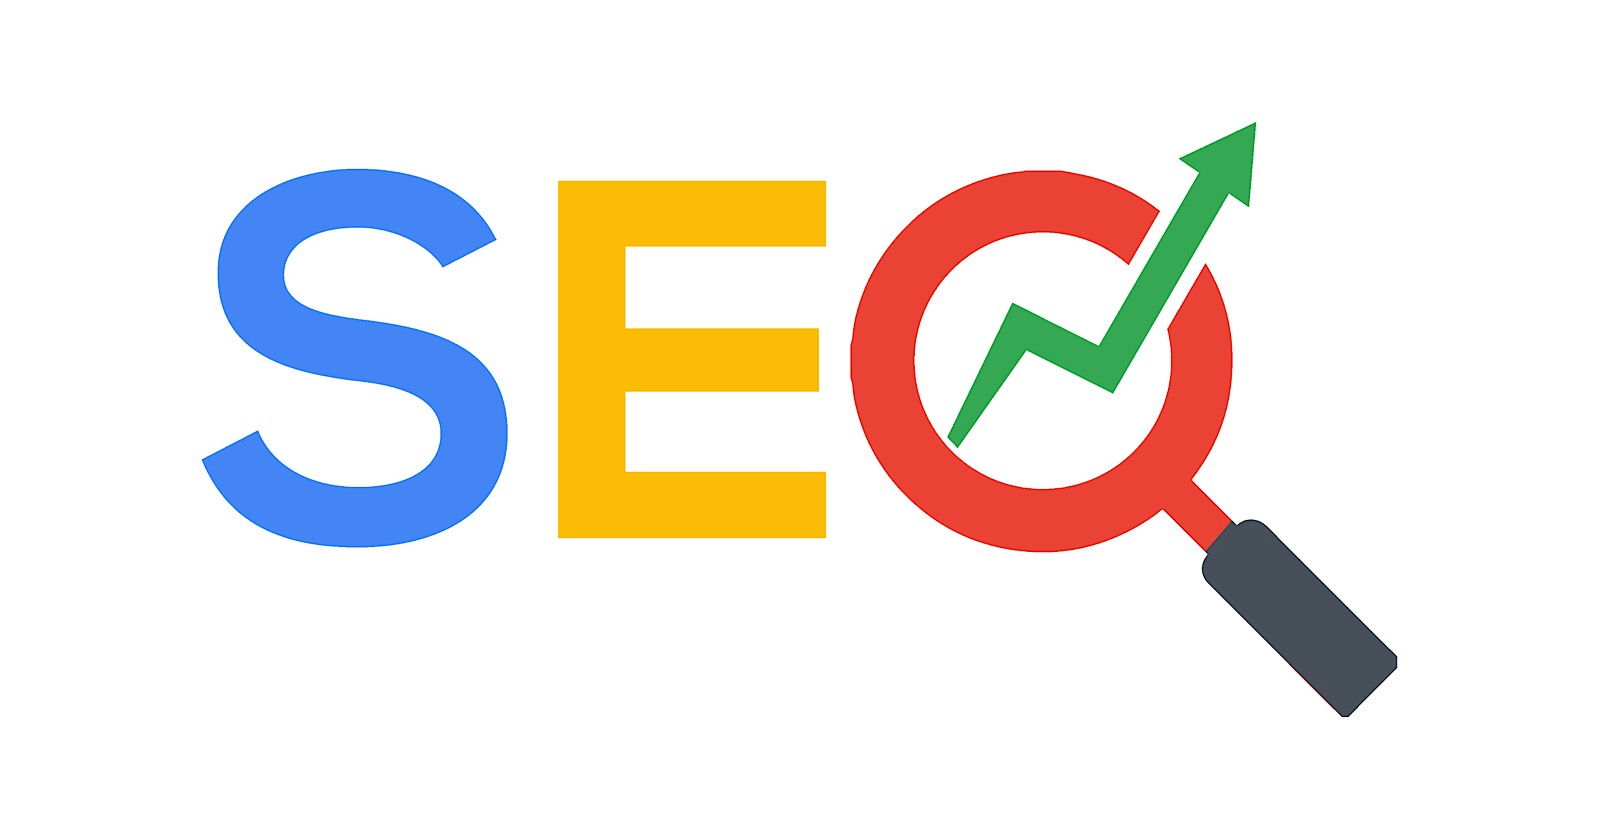 Seo Company - All there is to know about SEO Agency - ProStar SEO